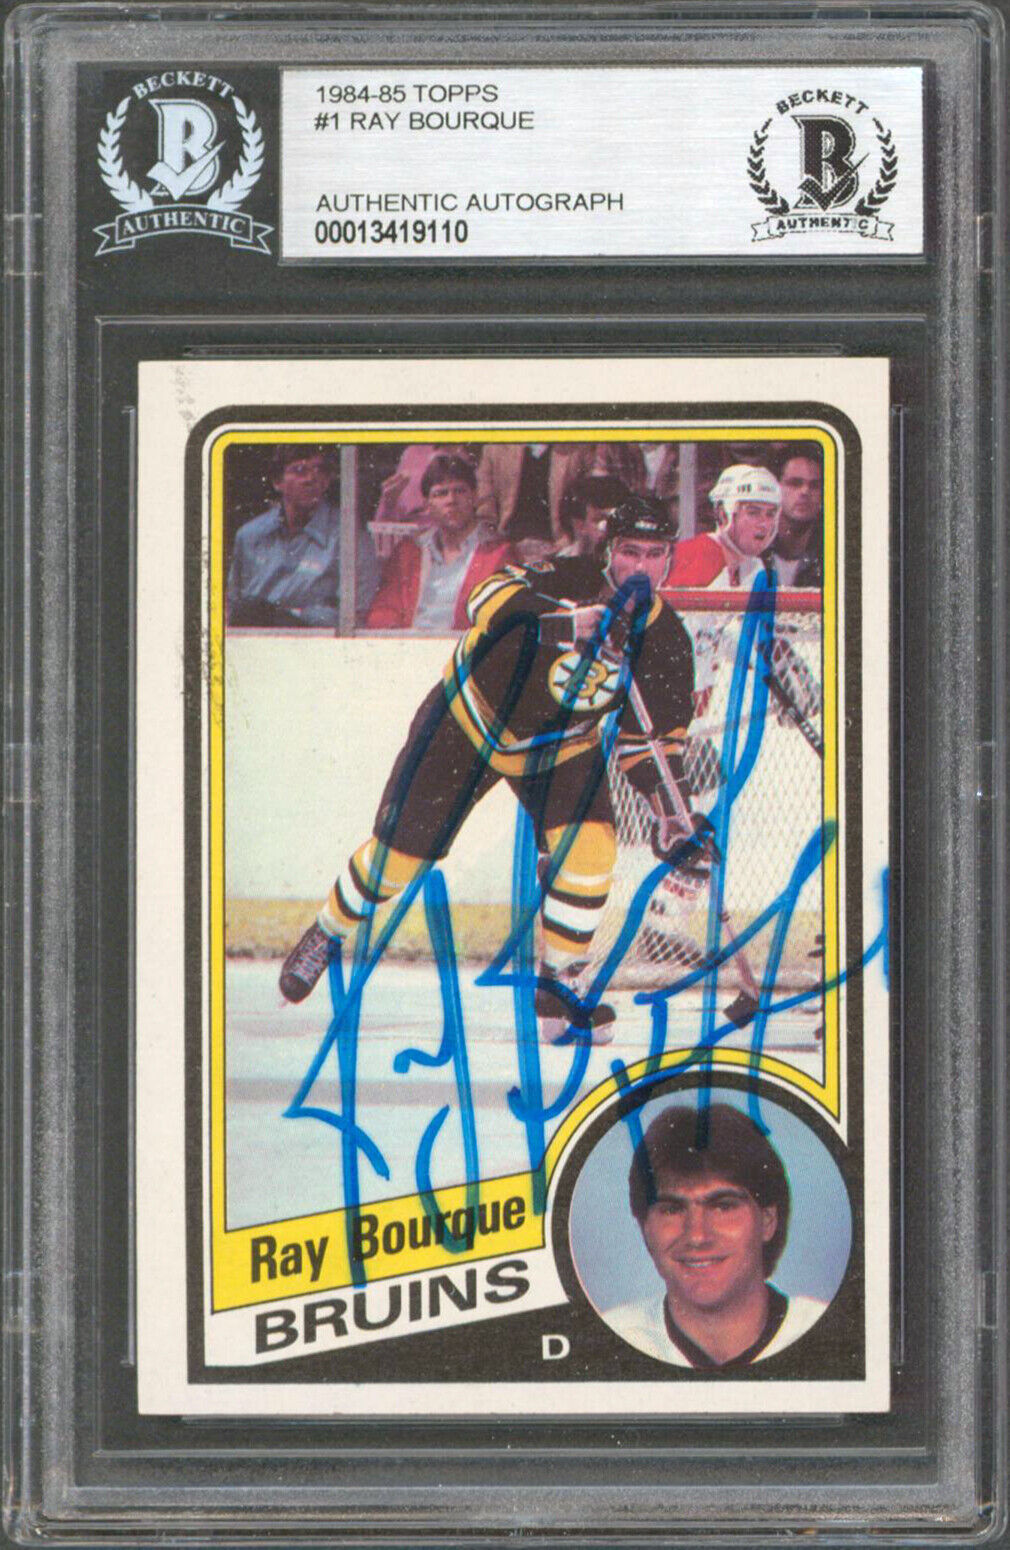 Ray Bourque Signed/ Autographed Jersey Swatch 36x25 Frame - Boston